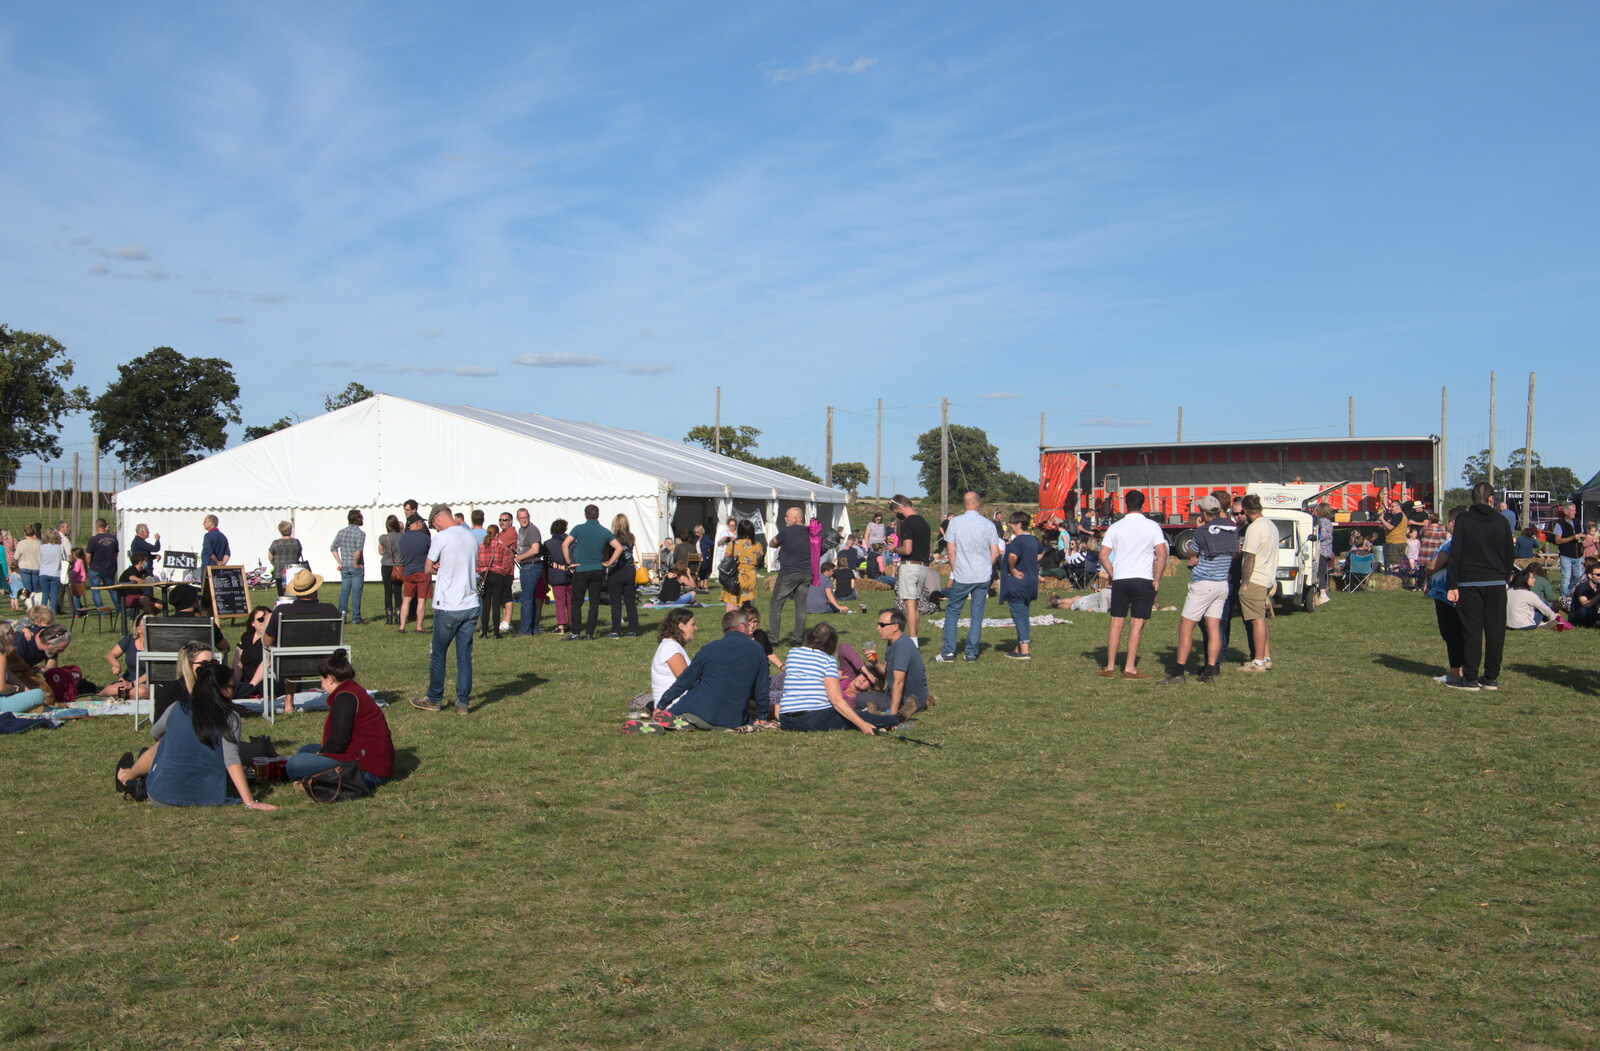 The queue for the bar is massive from Star Wing's Hops and Hogs Festival, Redgrave, Suffolk - 12th September 2020